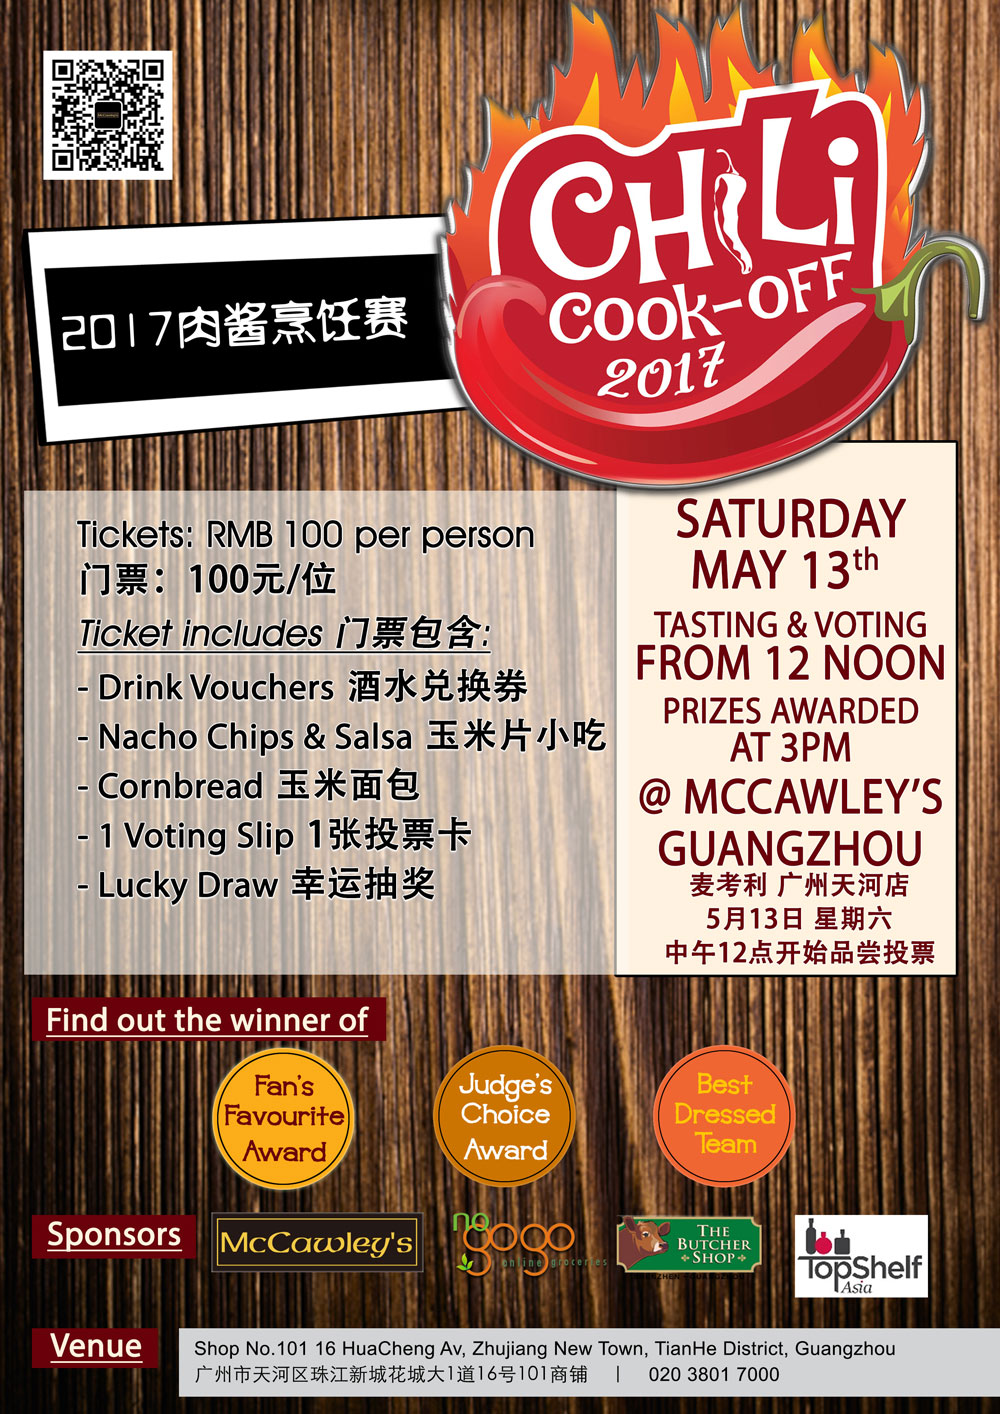 Chili-cook-off-GZ-poster-2017.jpg